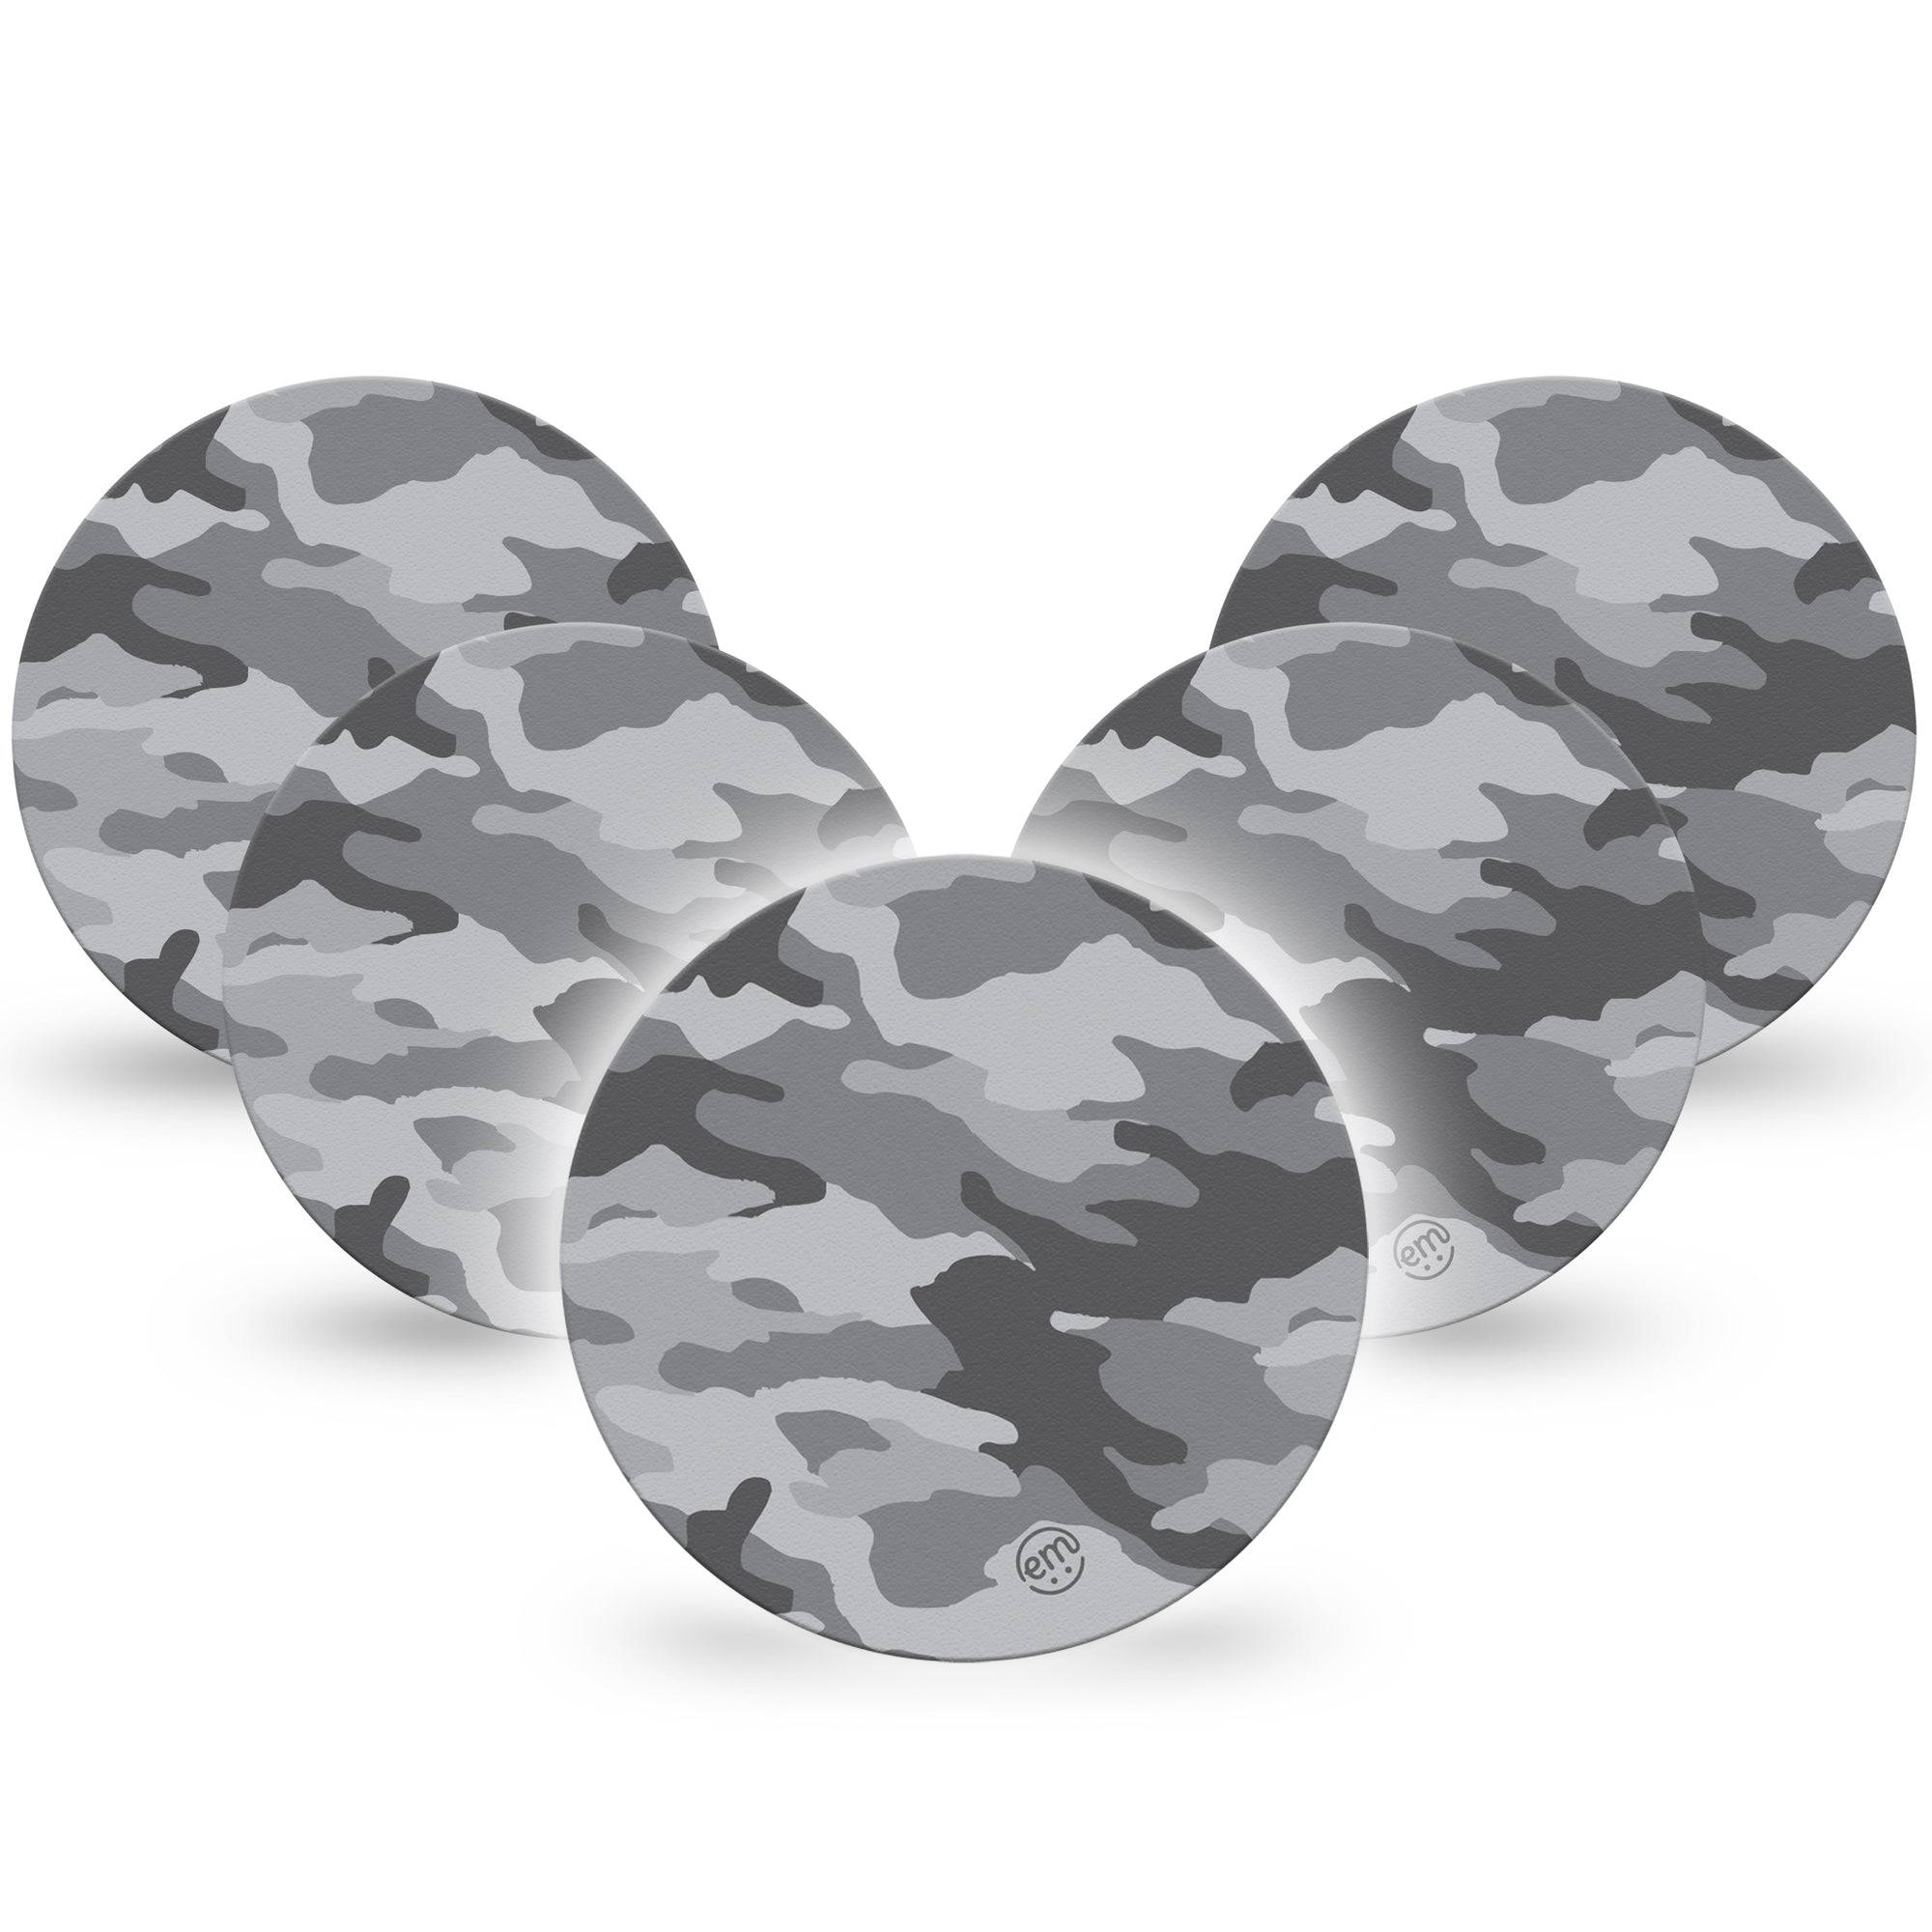 ExpressionMed Gray Camo Libre OverPatches